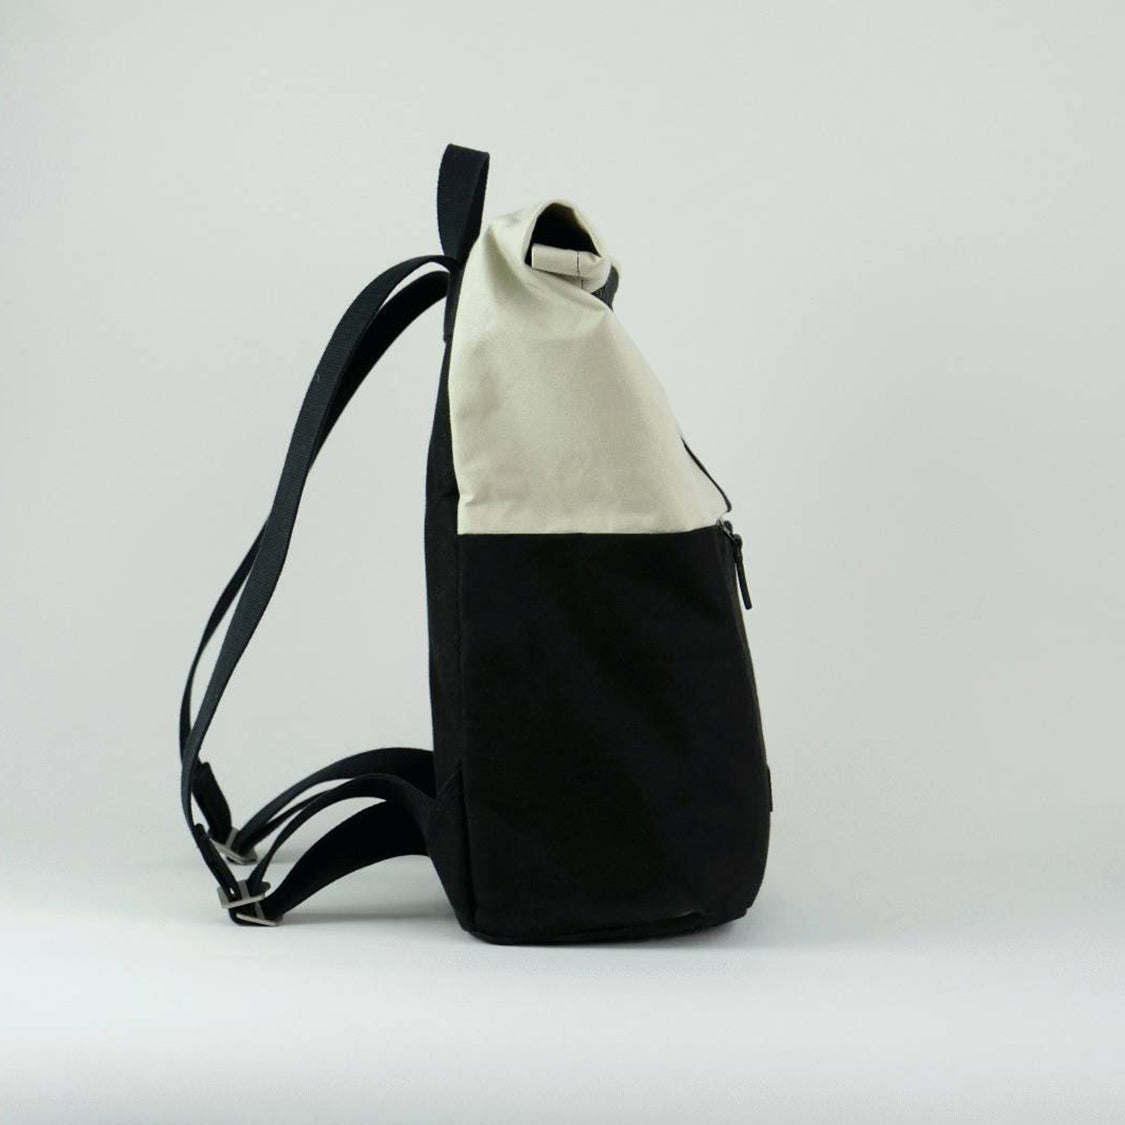 Side view of Max the backpack. A rolltop backpack made of waxed canvas in chalk white and black, with a side zipped pocket visible for storage of phone or keys.